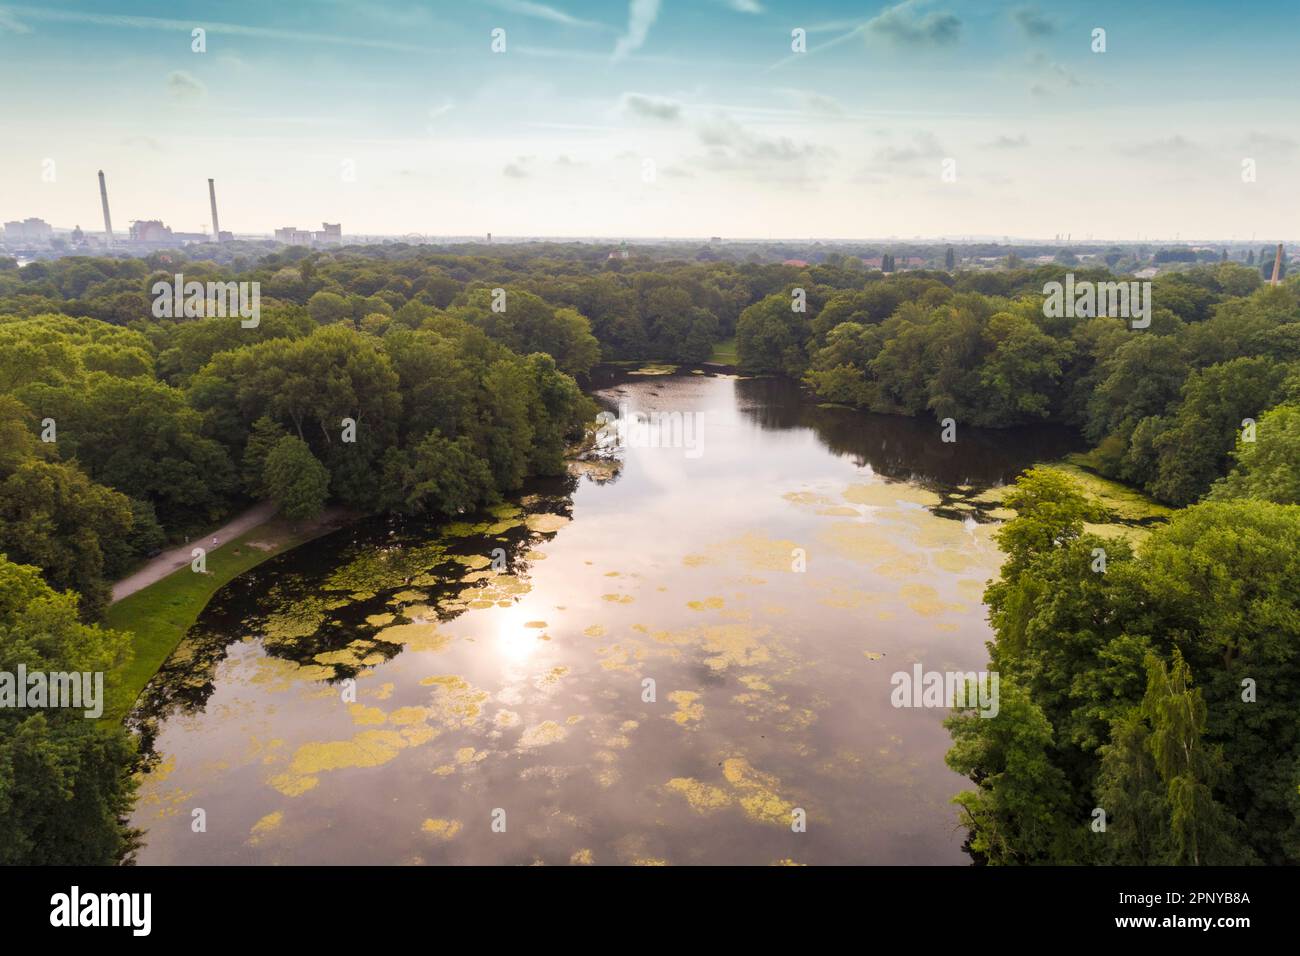 Aerial view of lake at Treptower Park, Berlin, Germany Stock Photo